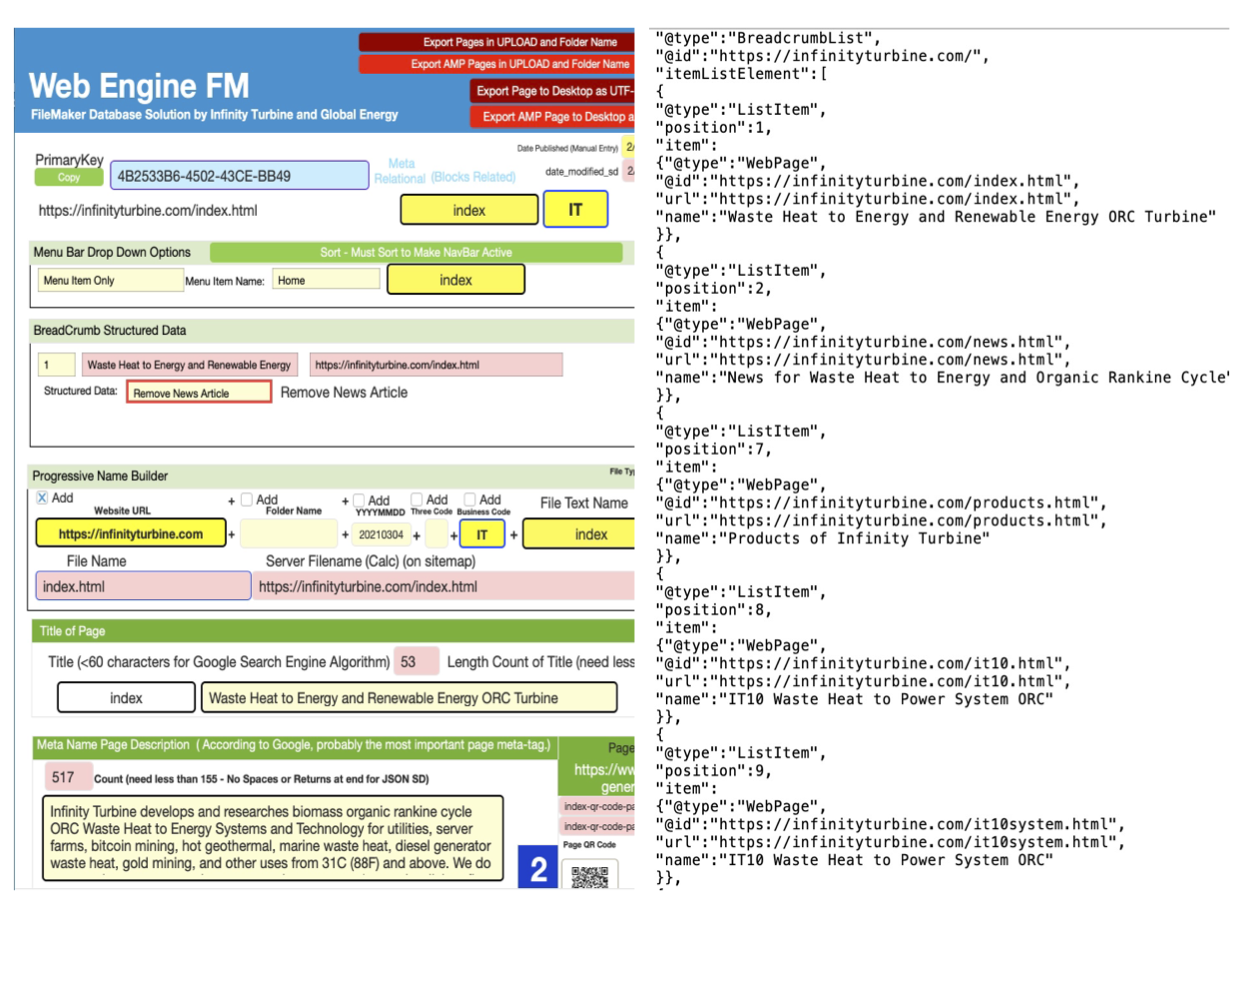 Web Engine FM builds structred data automatically and generates web pages with breadcrumbs